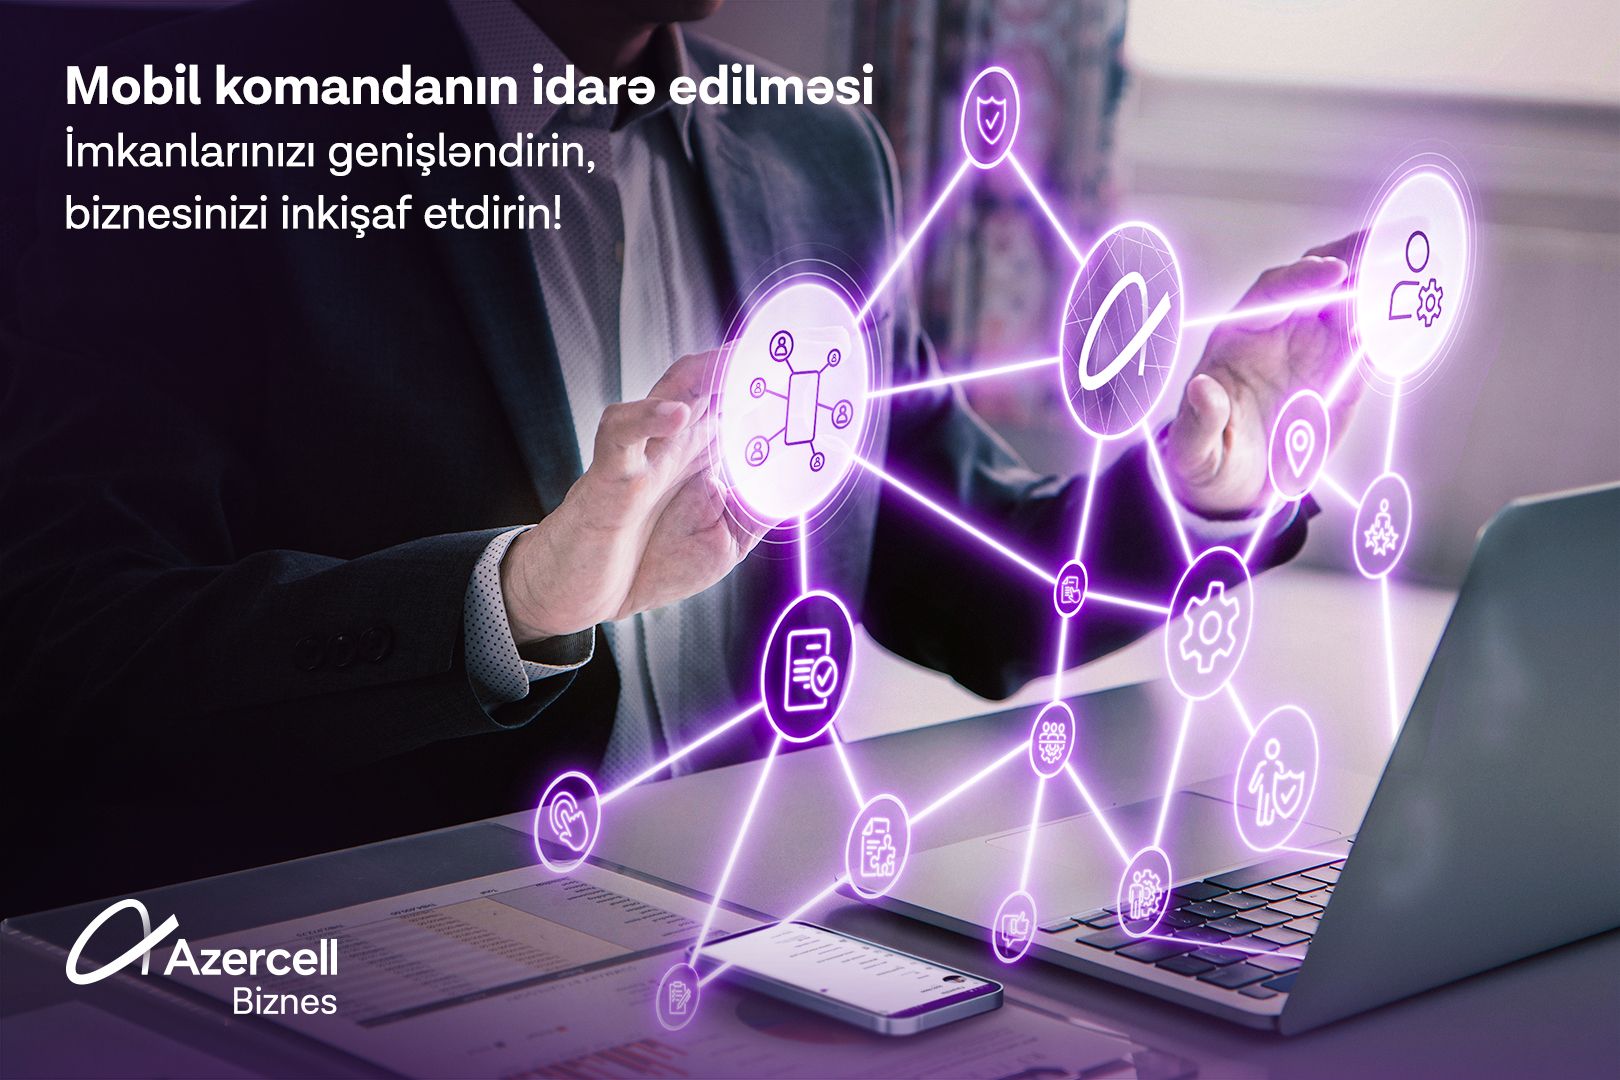 Azercell Business presents "Mobile Team Management" solution